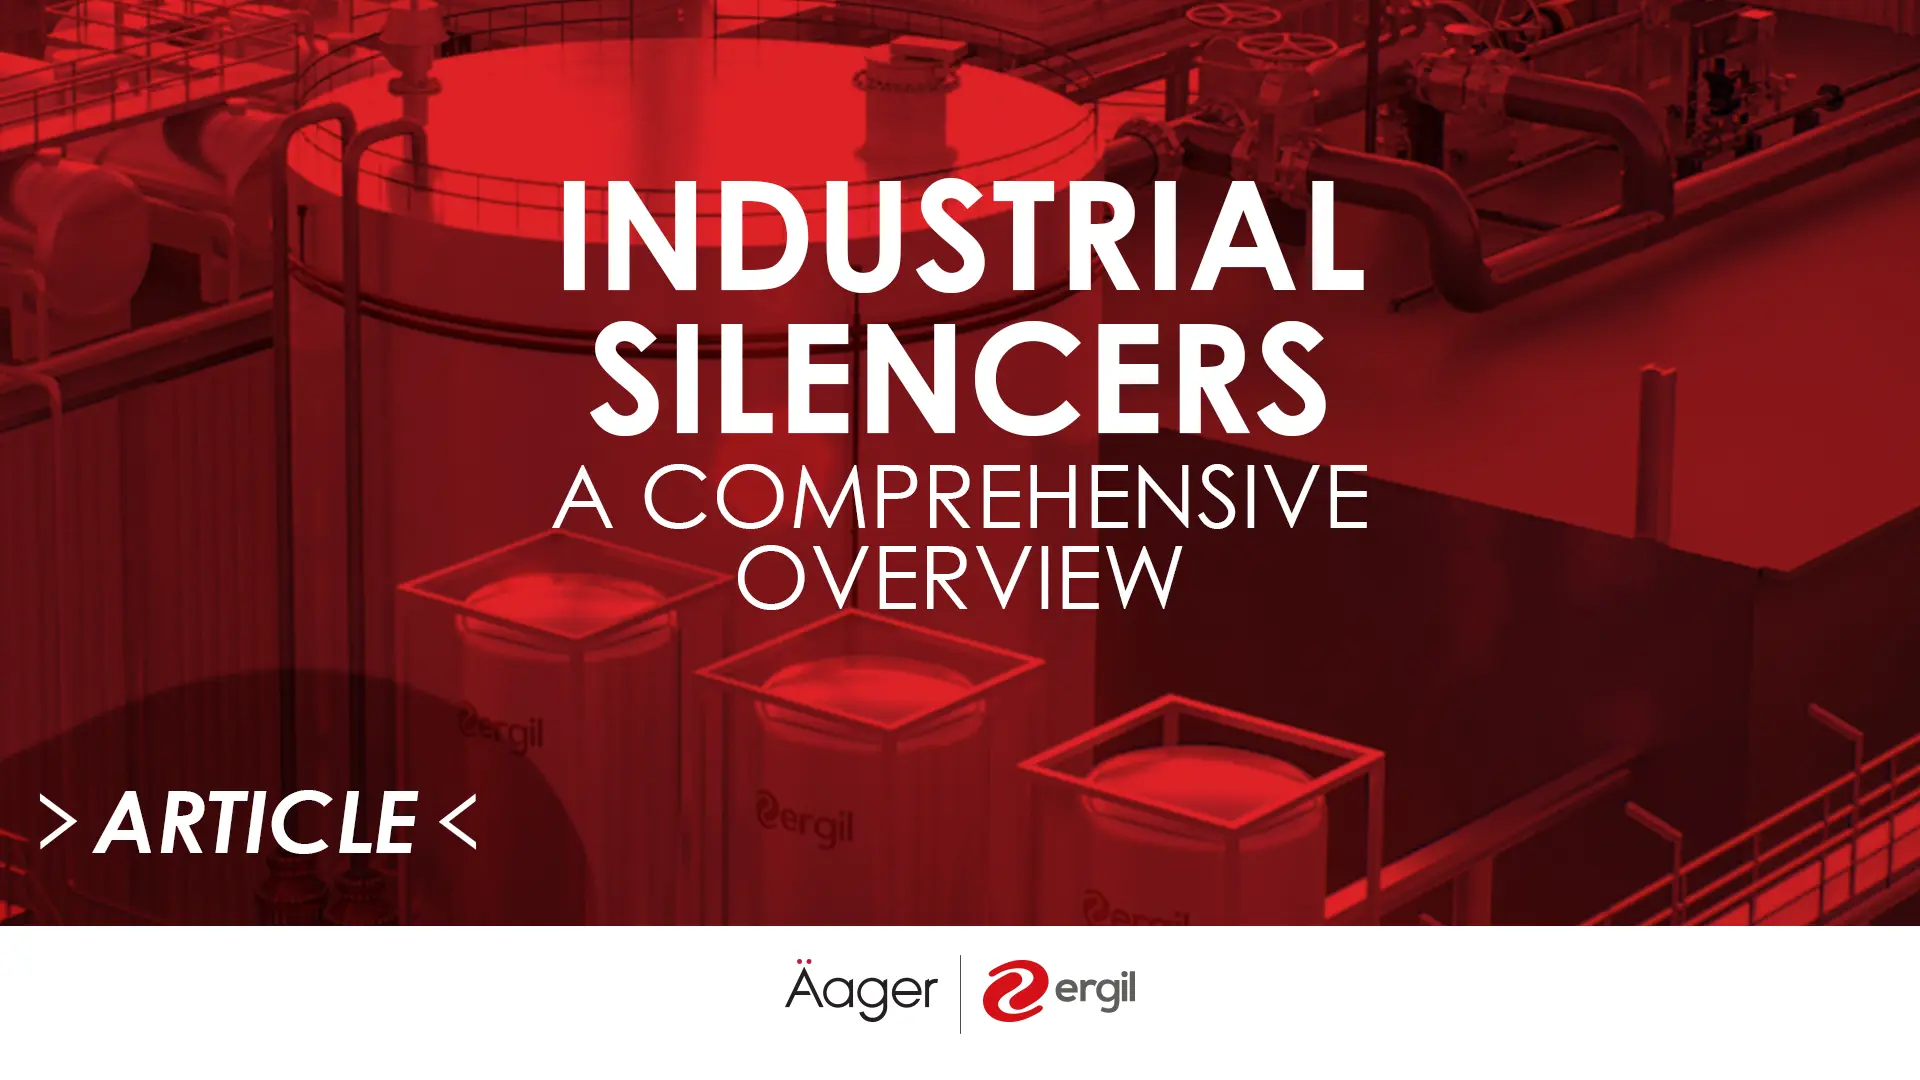 Industrial Silencers: A Comprehensive Overview 37